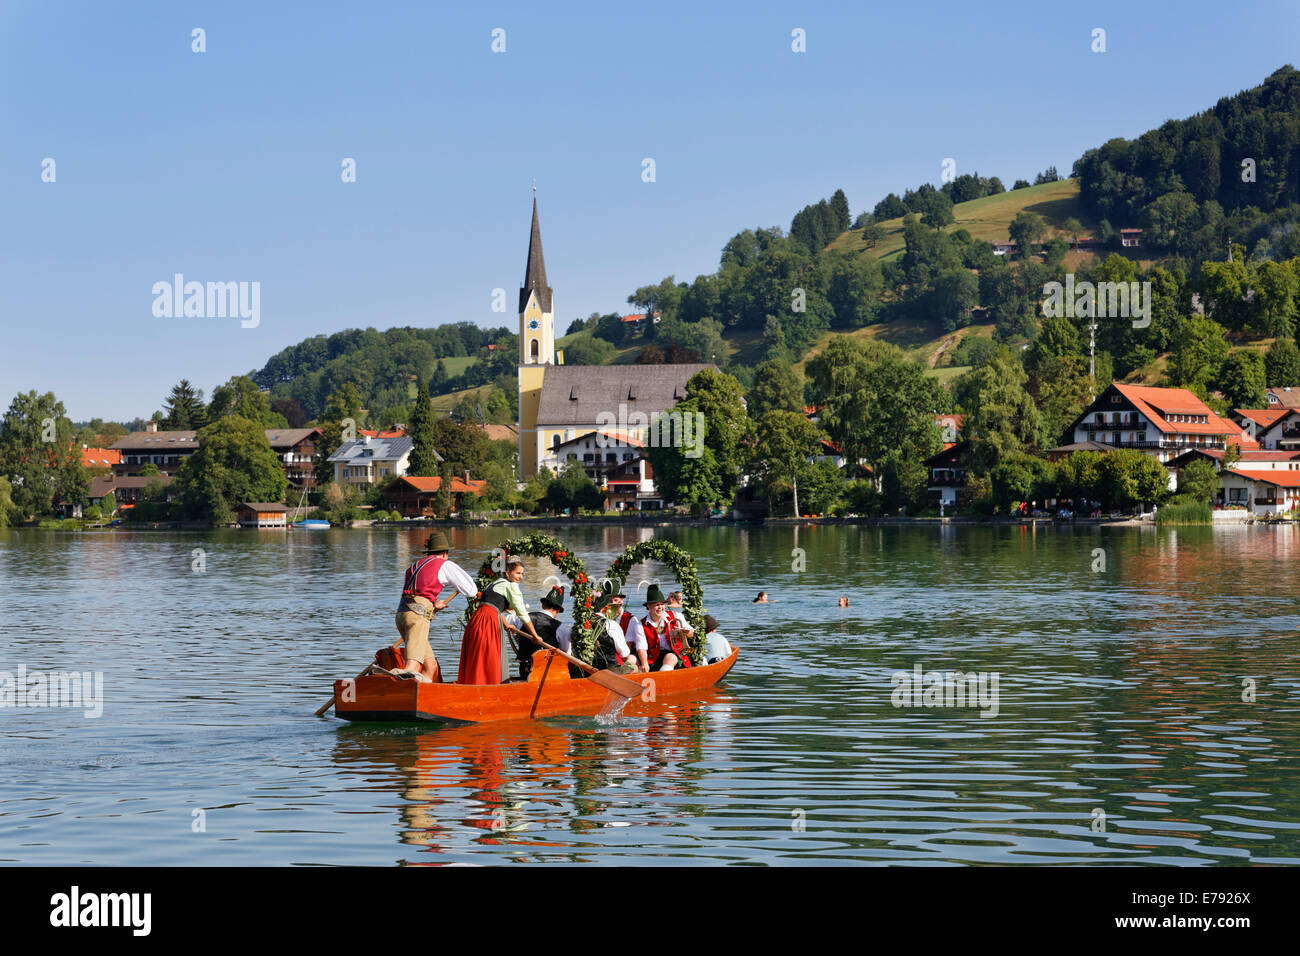 Locals wearing traditional costumes in decorated wooden Plätte boats, the church of St. Sixtus at the back, Stock Photo